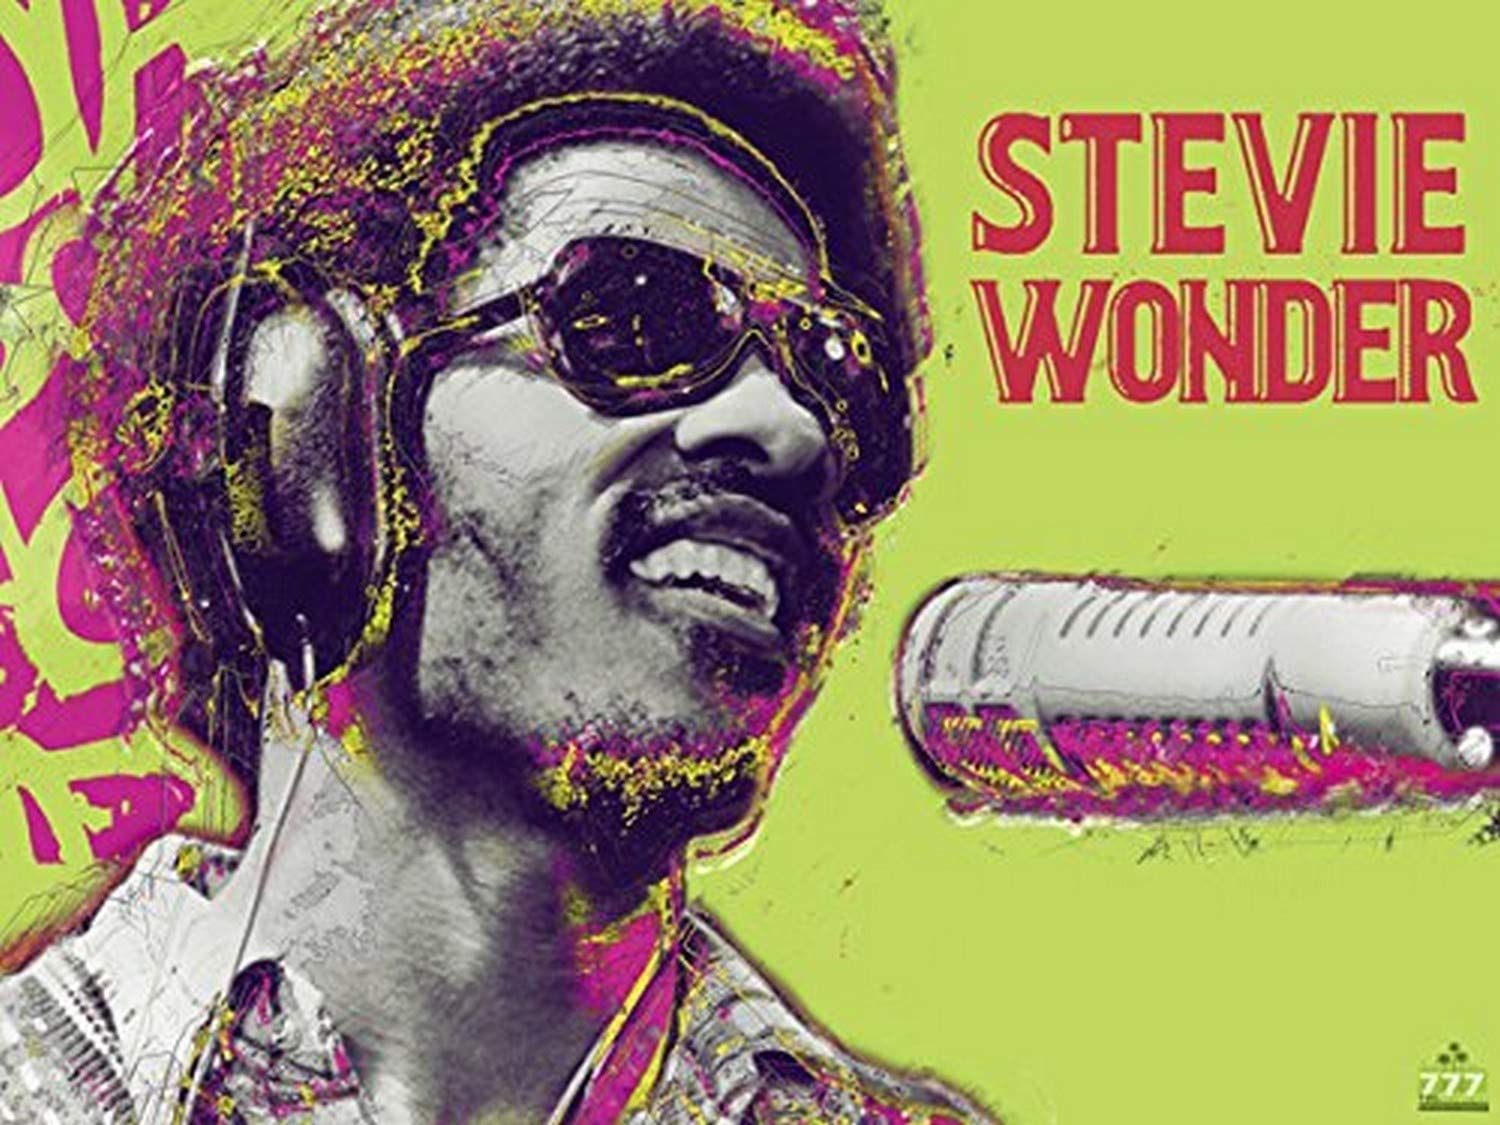 NCT 127 Art Gifts - A colorful Stevie Wonder poster.